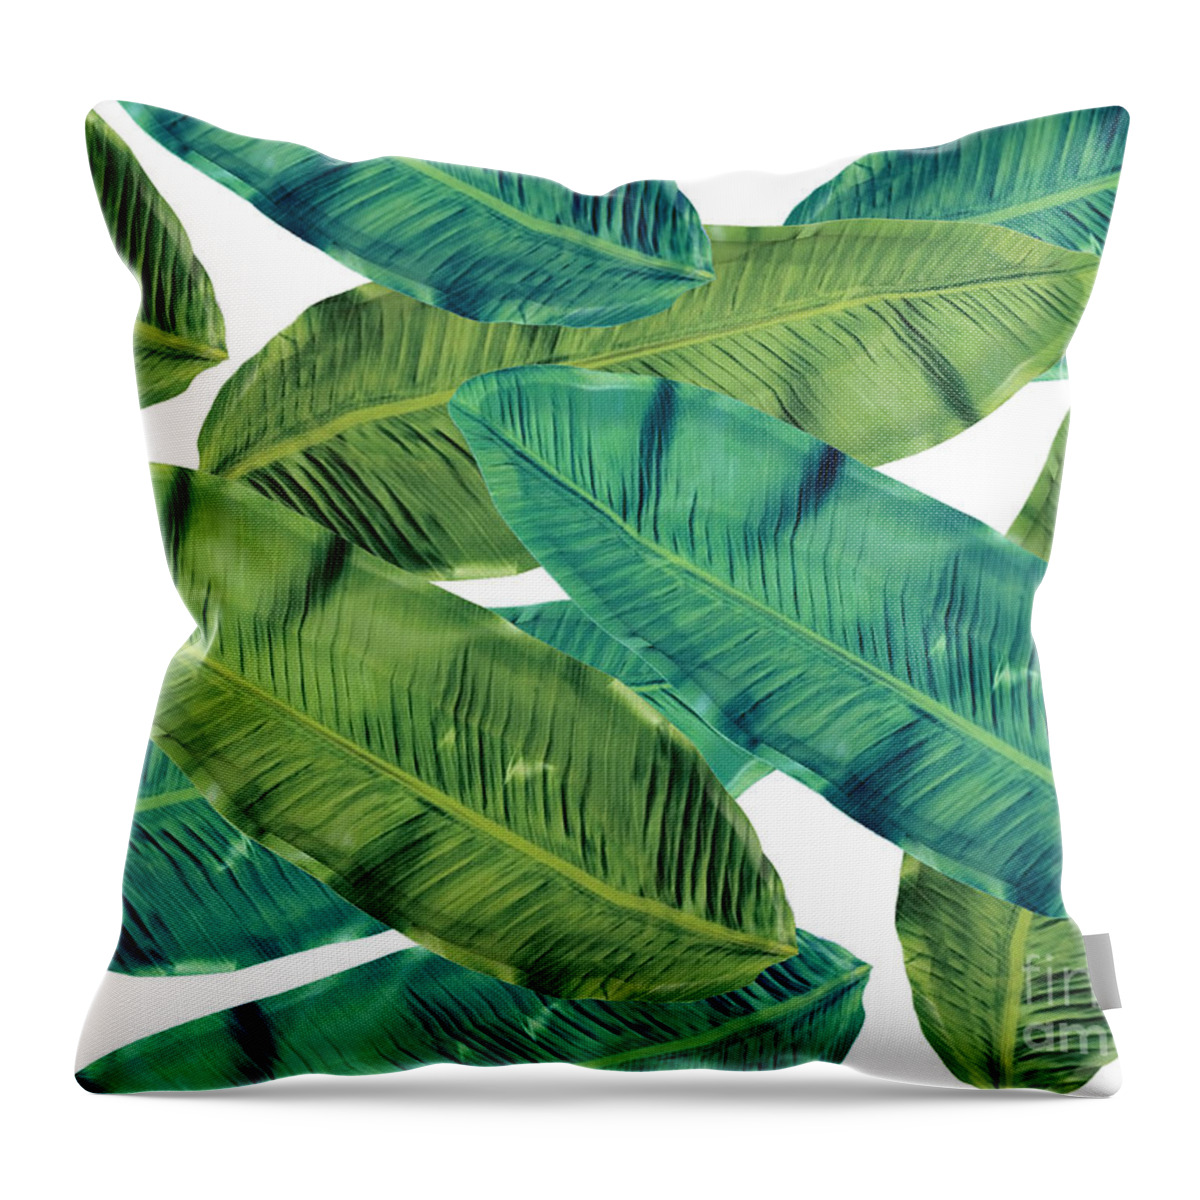 Tropical Leaves.nature Design Throw Pillow featuring the painting Tropical Leaves 7 by Mark Ashkenazi